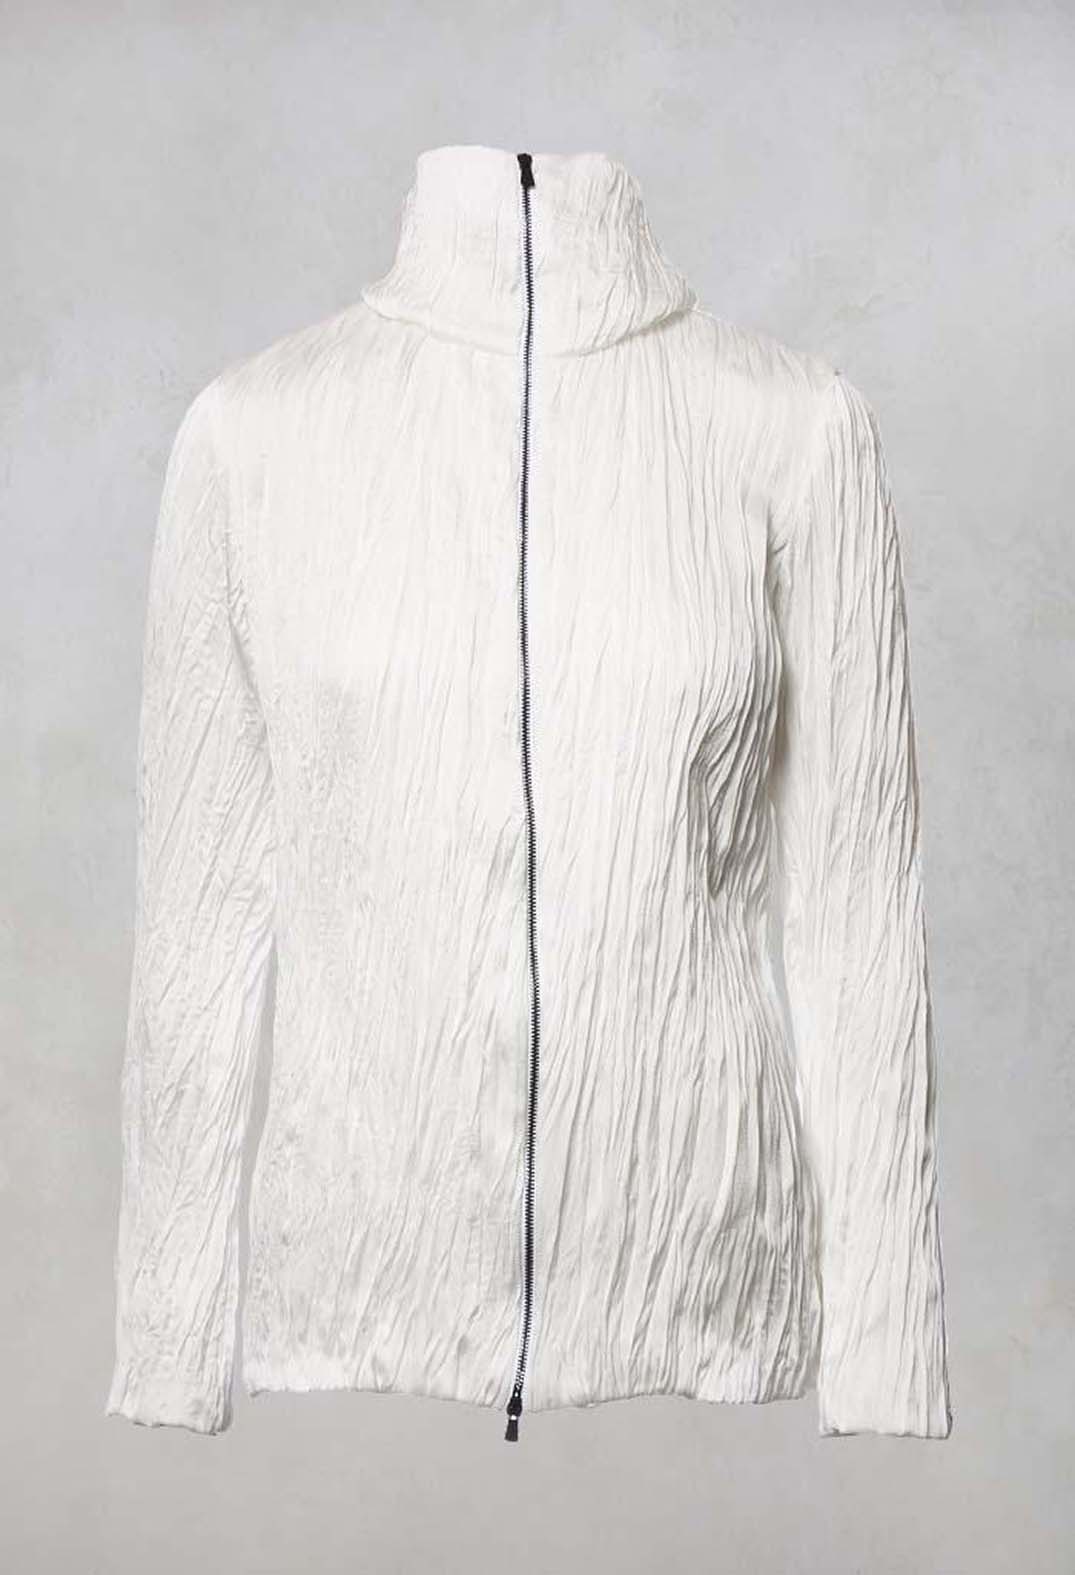 Crinkled Zipped Up Jacket in White